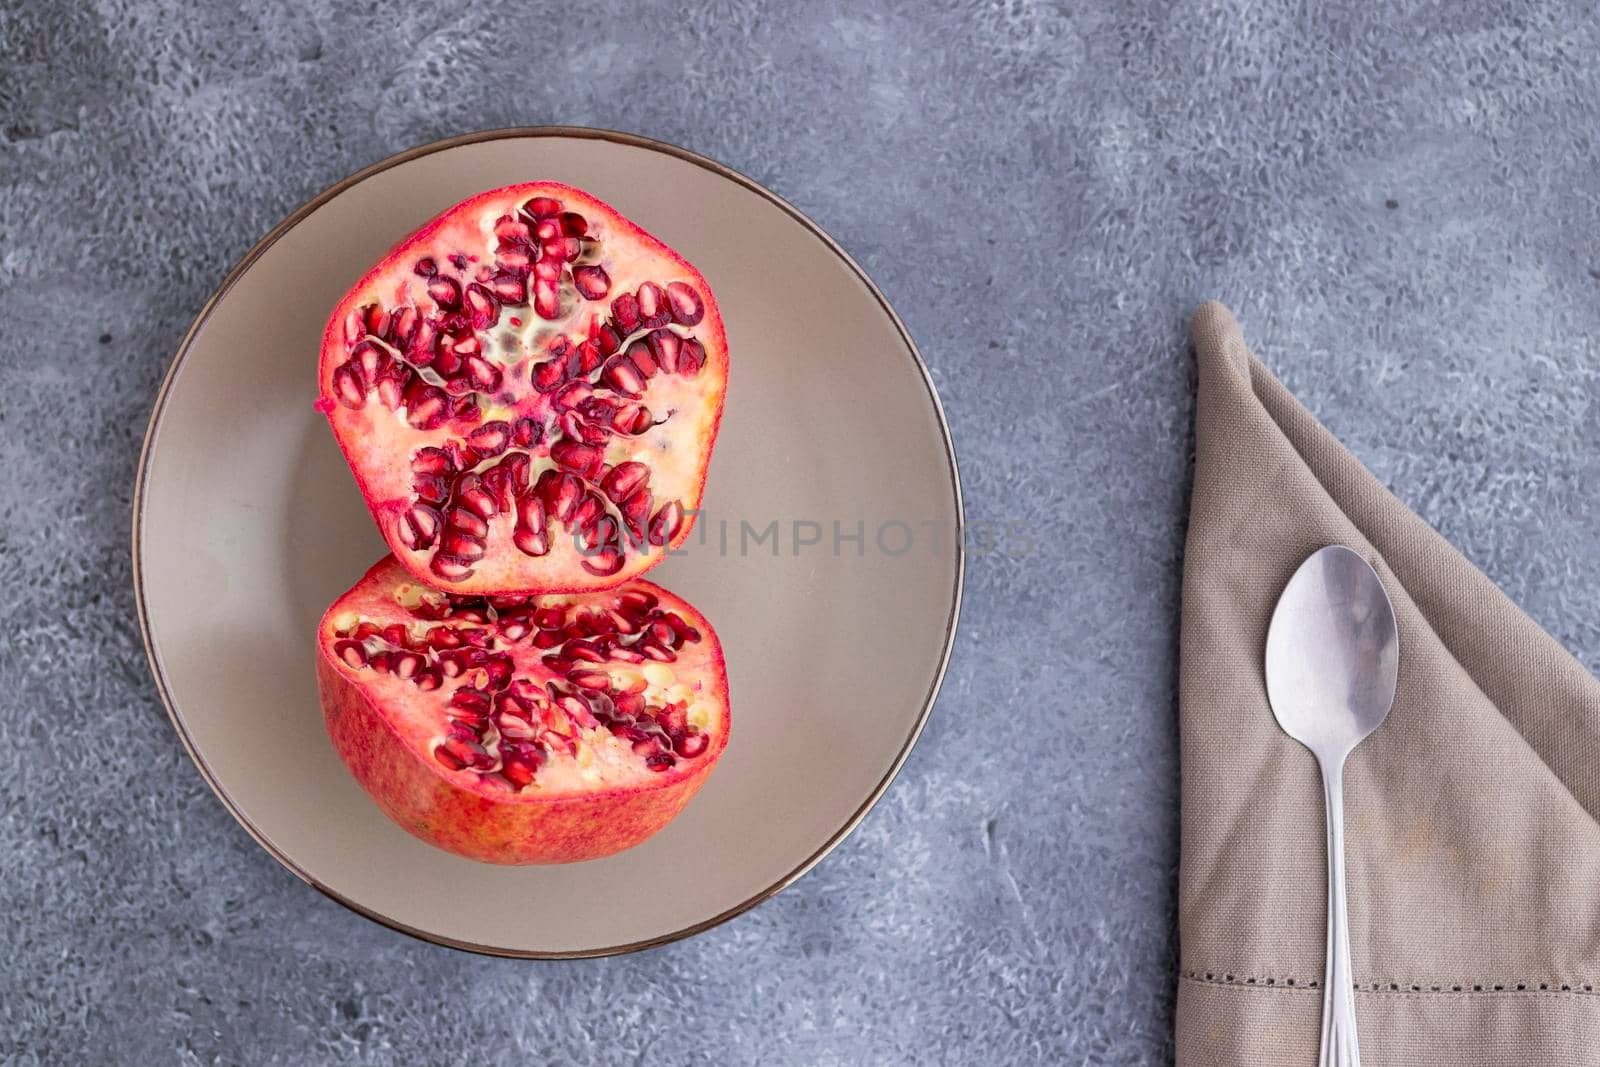 Pomegranate fruit cut in half and served on a plate by eagg13